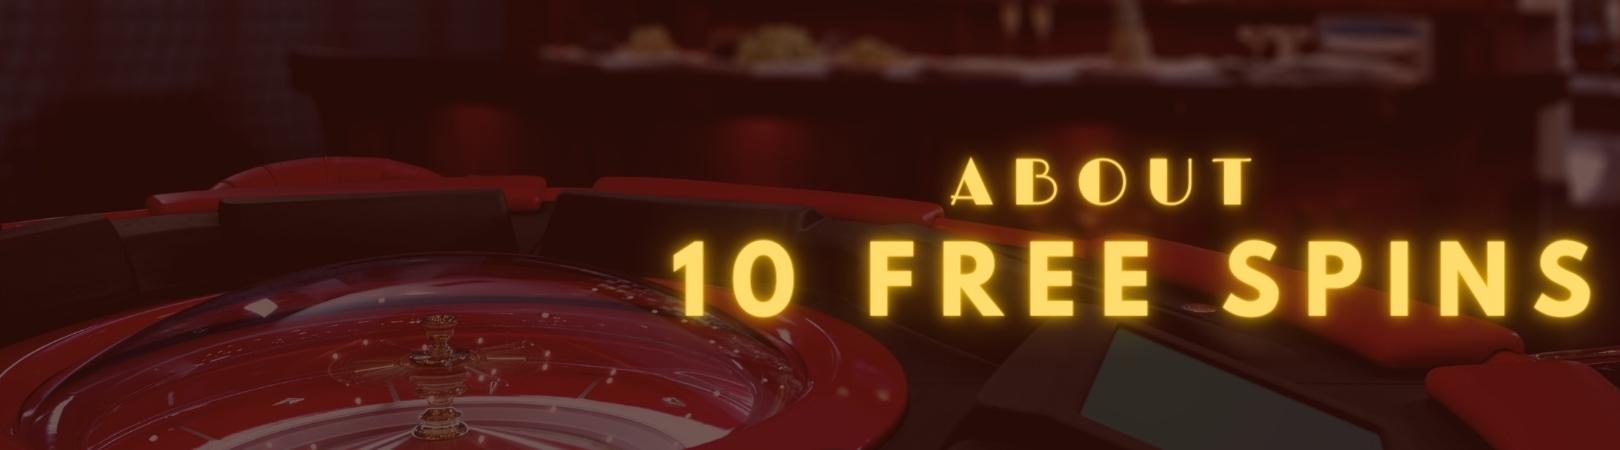 About 10 free spins img